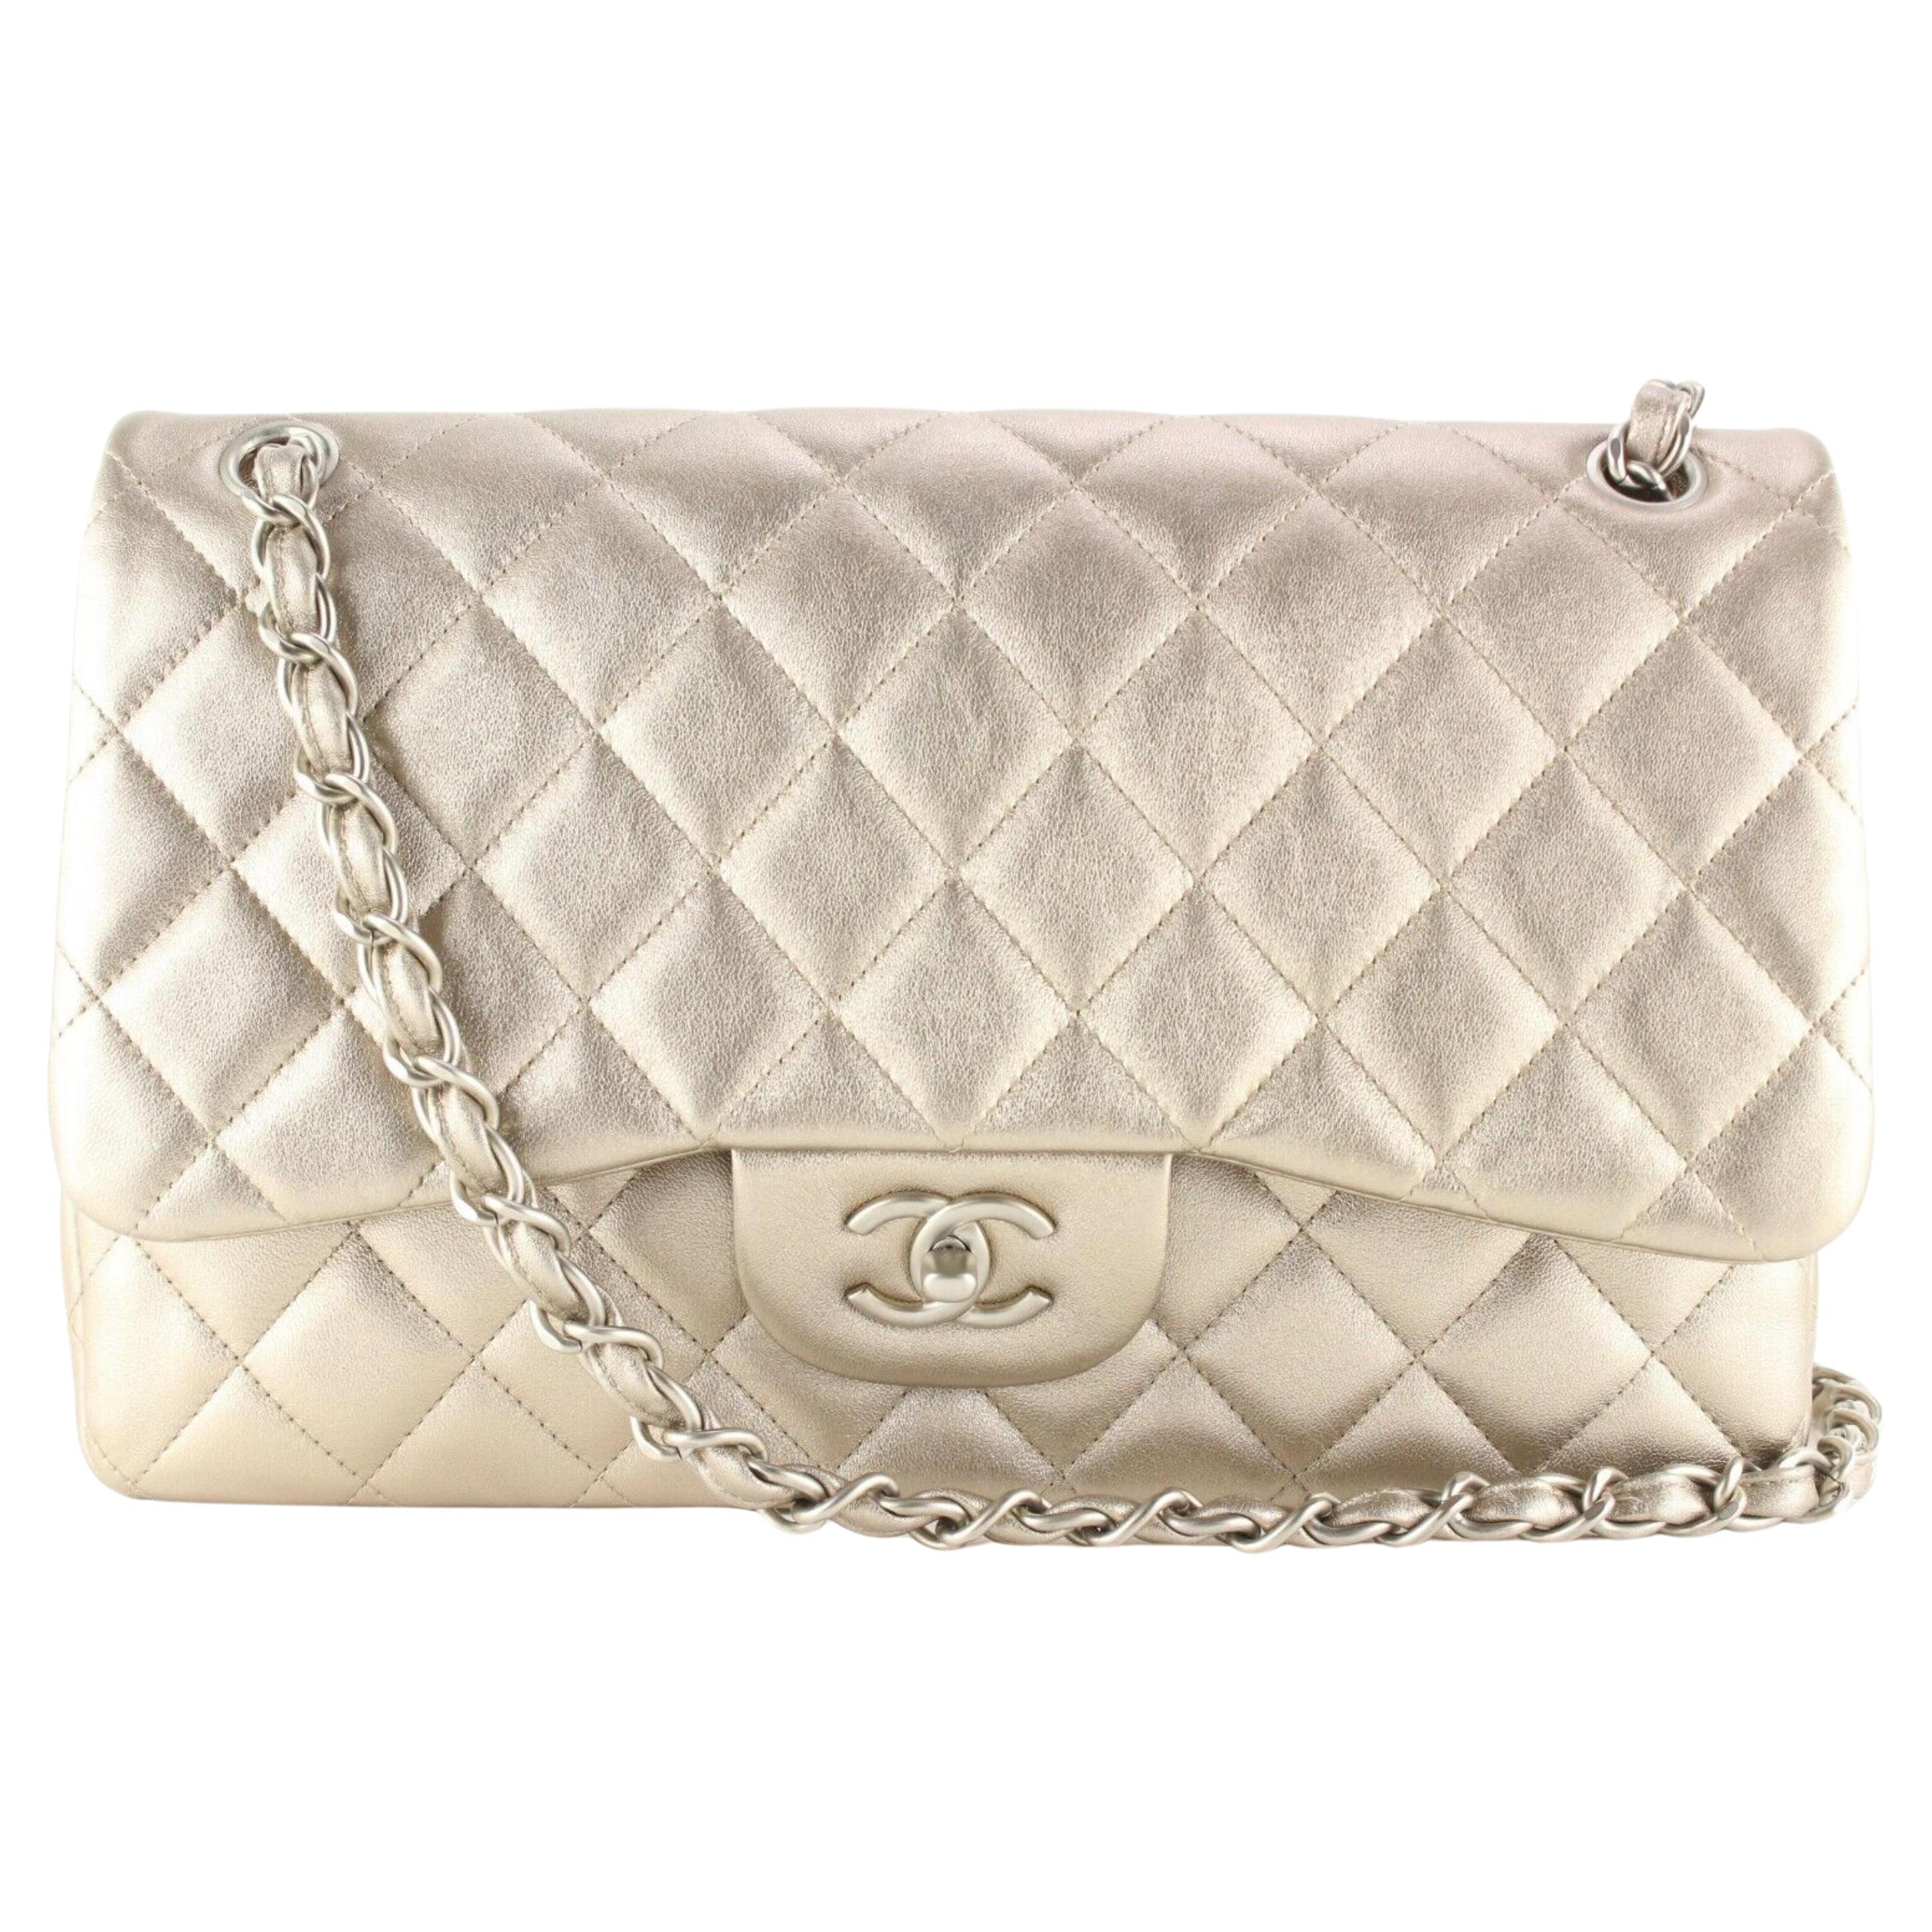 CHANEL Classic Lambskin Quilted Medium Double Flap Bag Beige